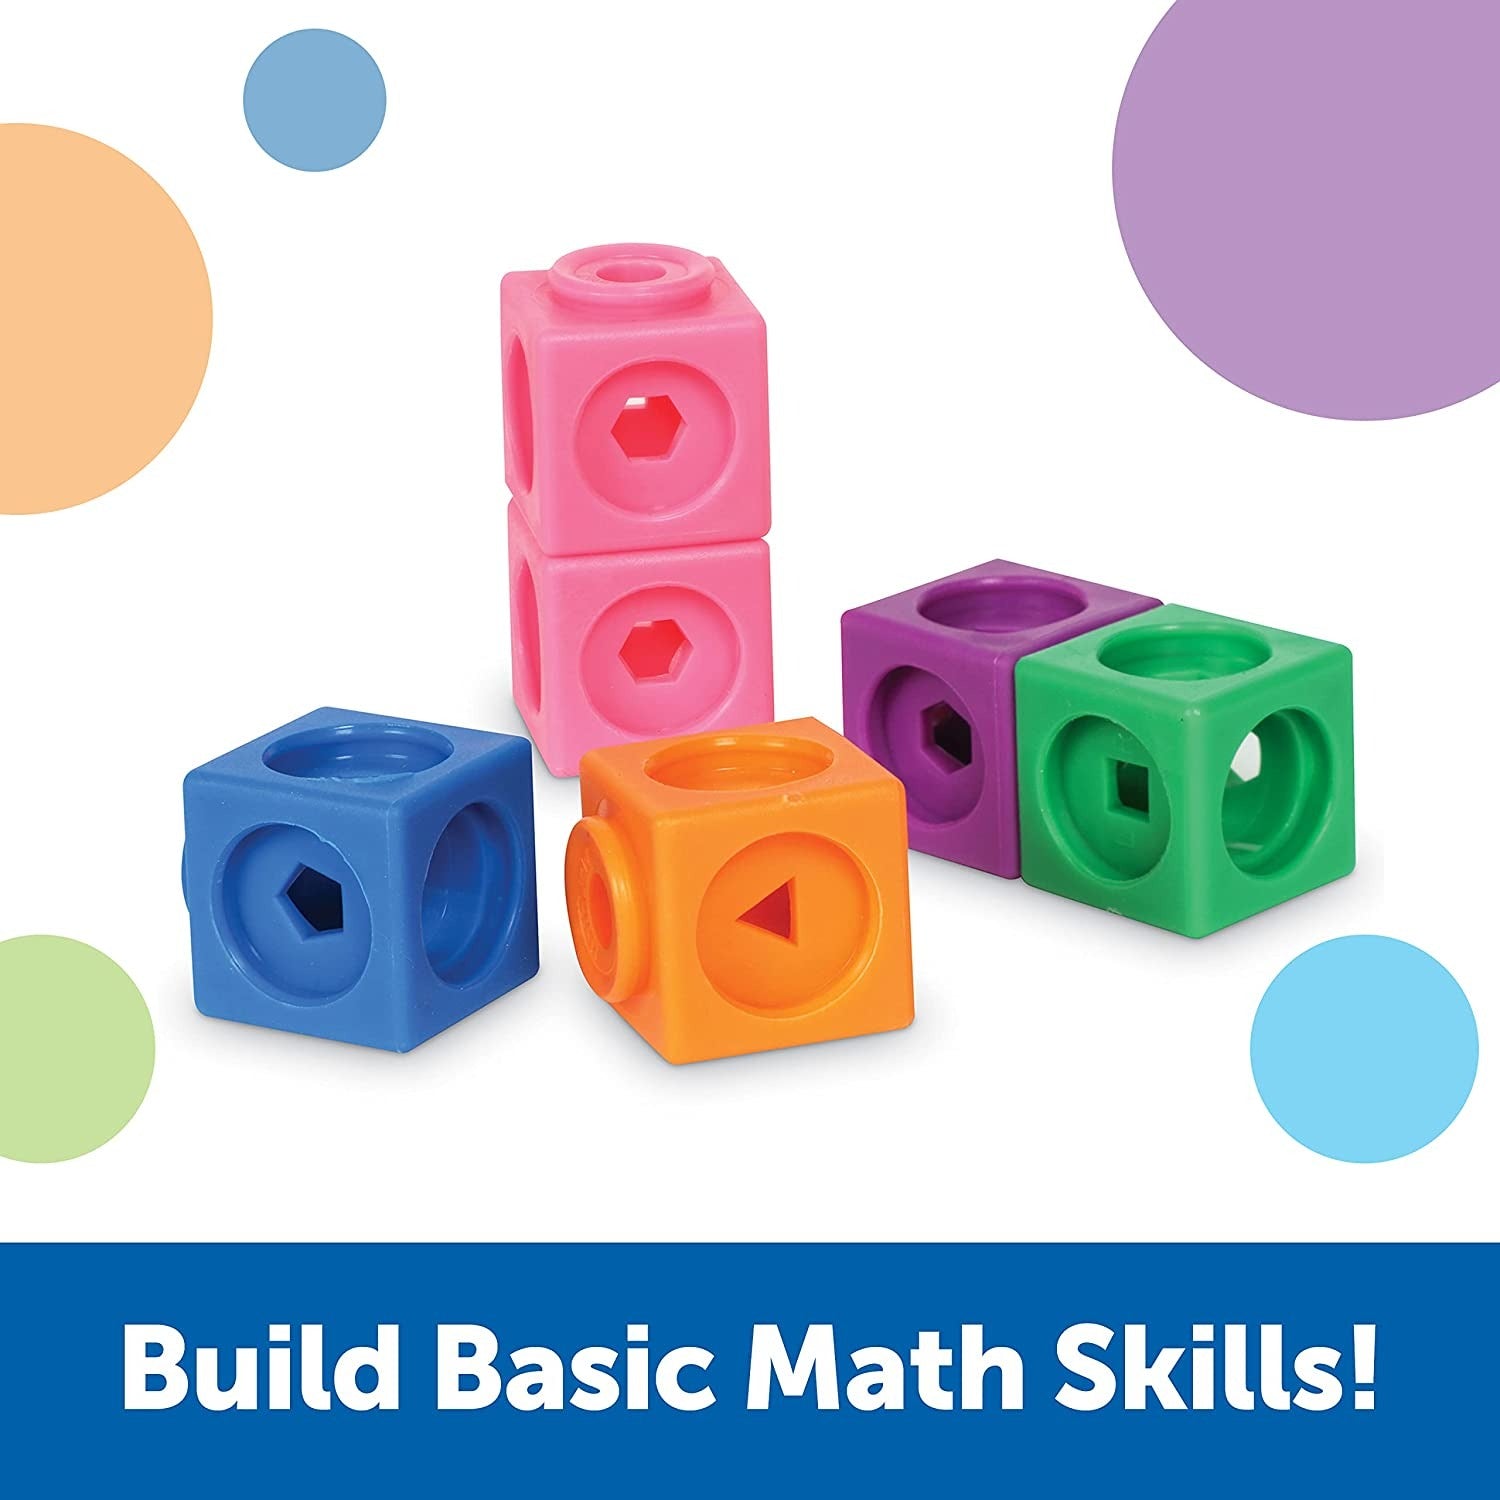 MathLink Cubes Set of 1000, Introducing the MathLink Cubes Set of 1000, the perfect educational tool for developing children's mathematical skills. These durable plastic cubes can be linked together in any way kids like, allowing for endless creativity and learning opportunities. With 10 vibrant colors included in the set, children can visually explore patterns, shapes, and numbers while engaging in hands-on activities. The MathLink Cubes offer a wide range of mathematical learning experiences, such as coun